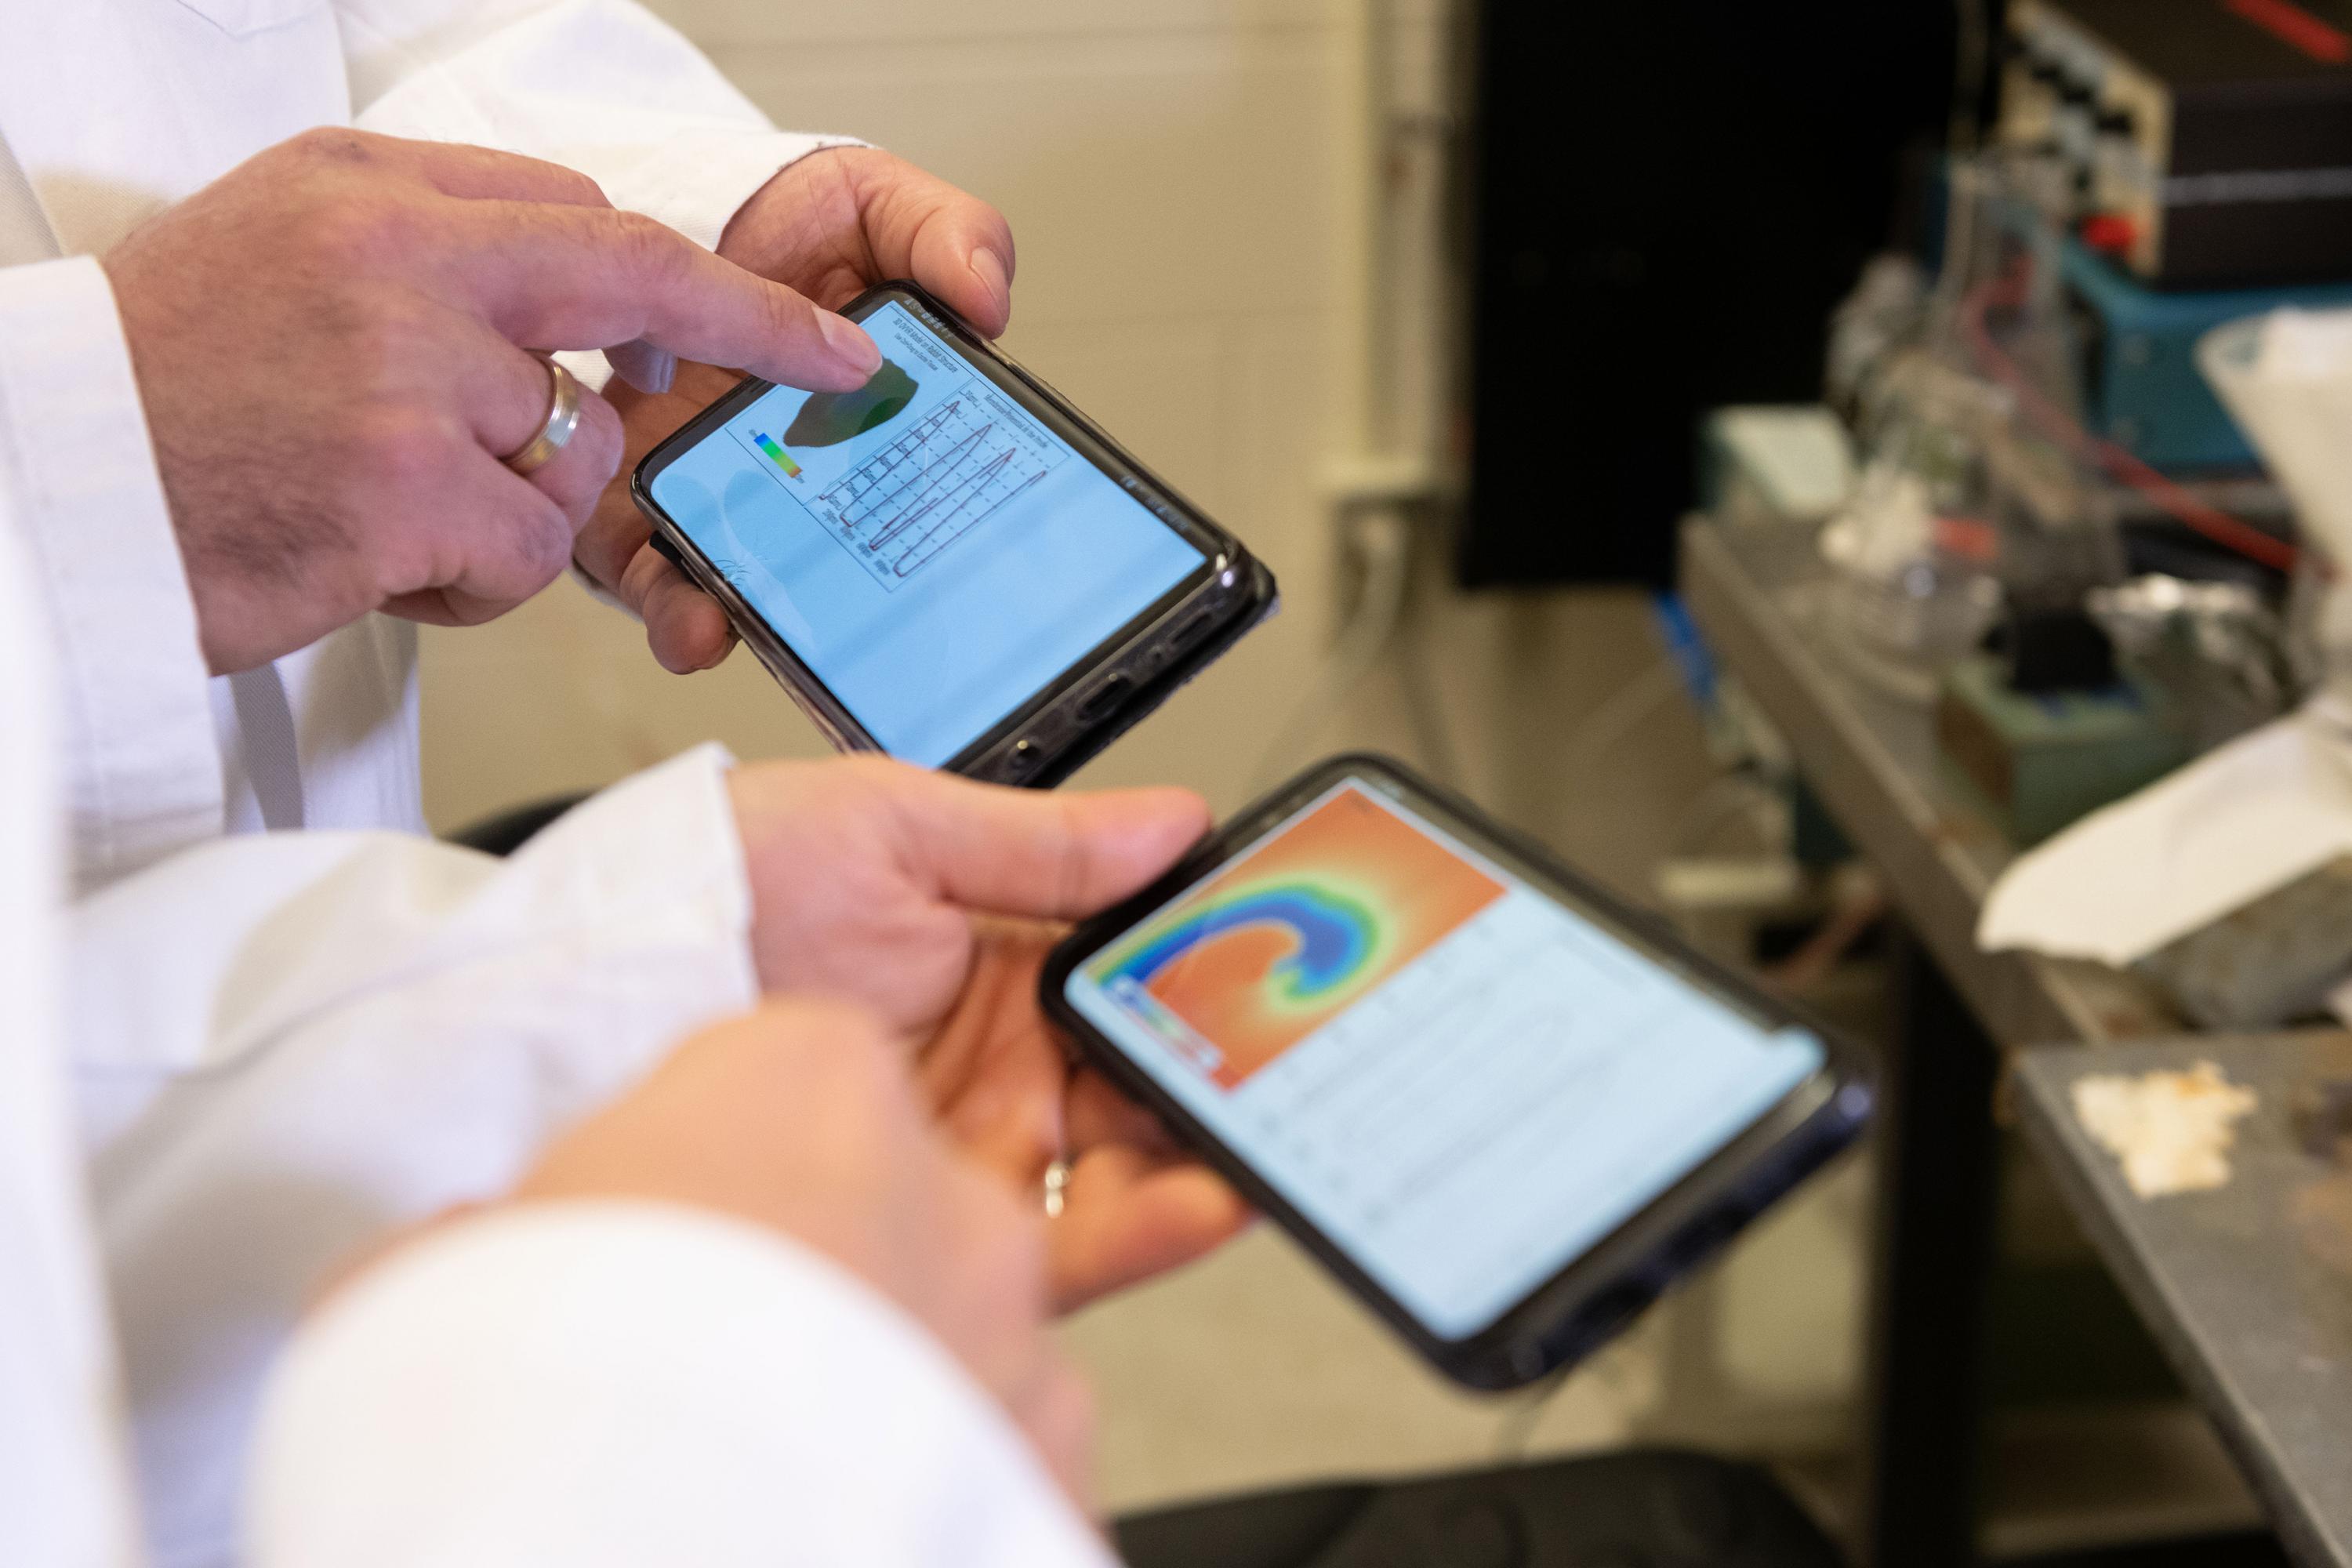 Smartphone screens show cardiac arrhythmia simulations running on the graphics processing units of the mobile devices using the new software. (Photo: Allison Carter, Georgia Tech)